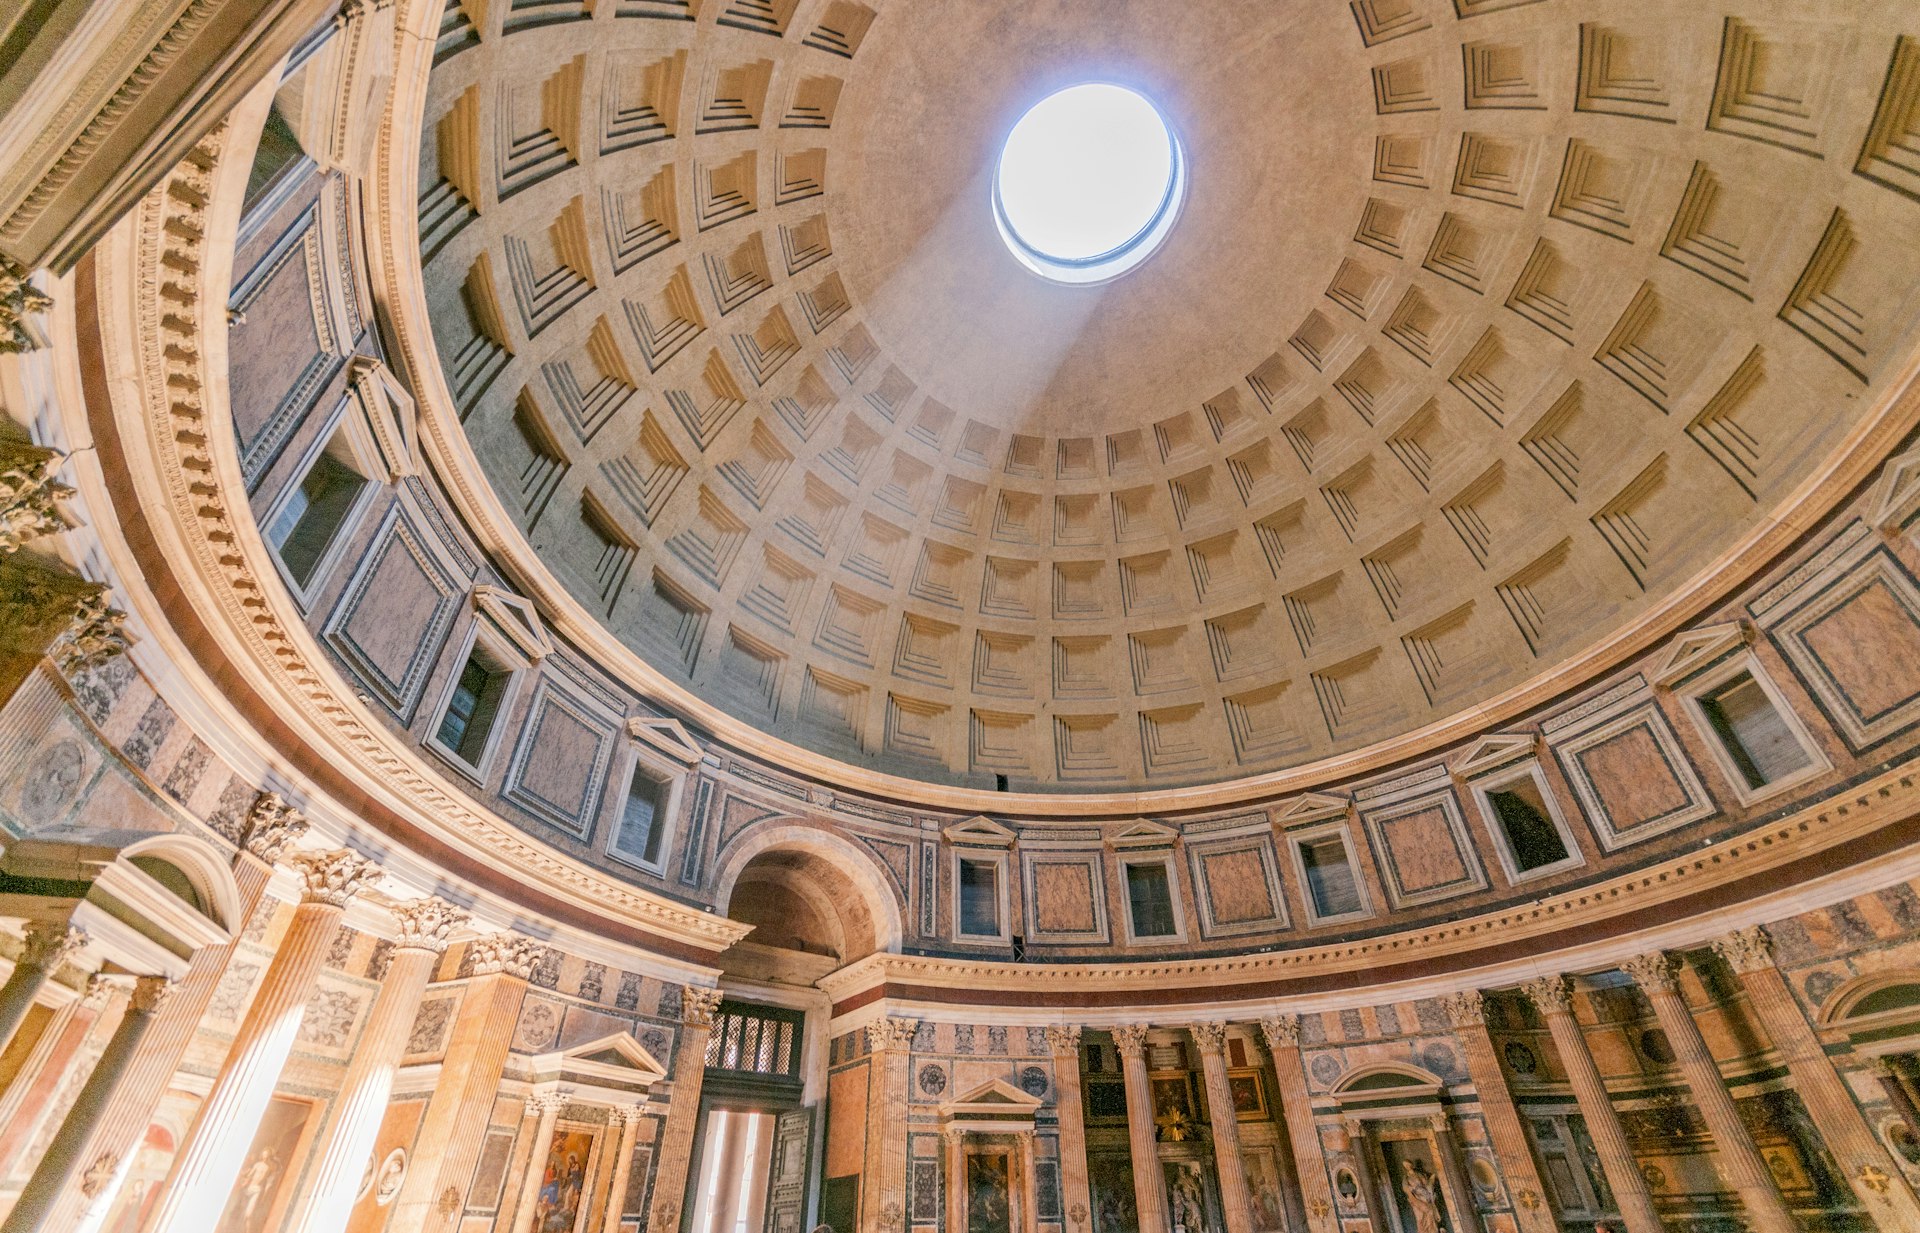 Interior photo of Rome's Pantheon shows the detail of the dome and its surrounding features.